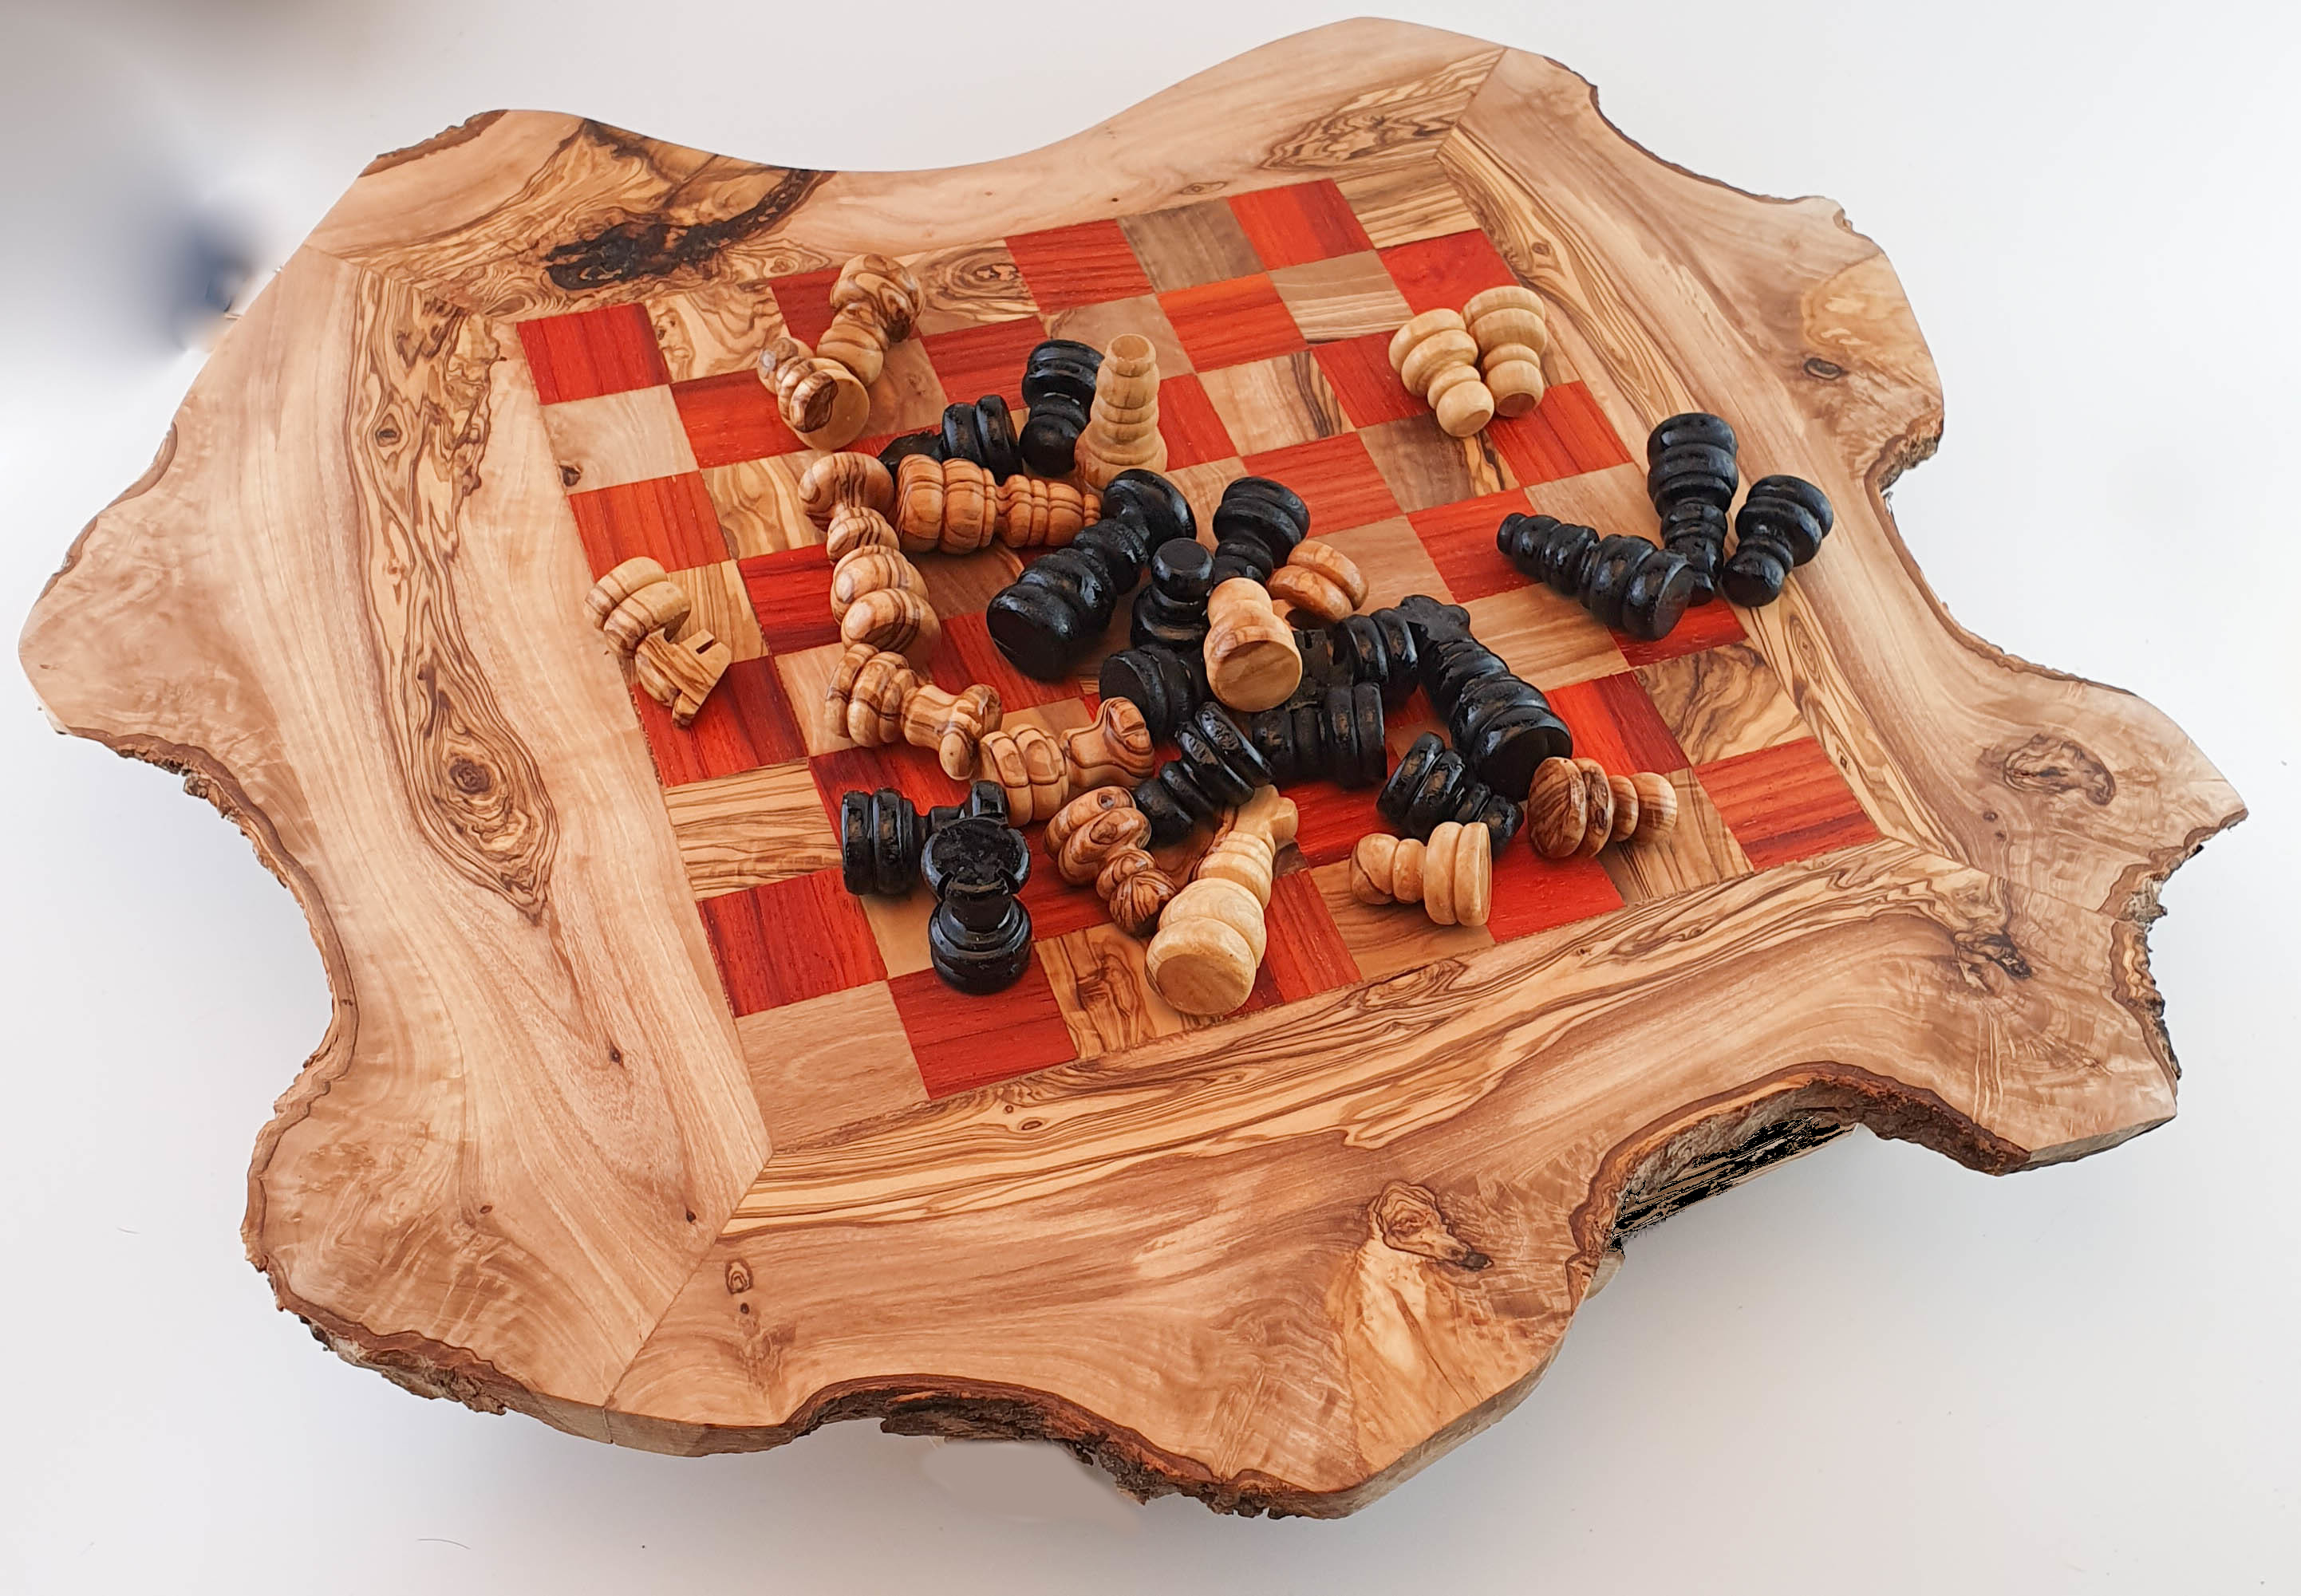 Rustic chess set made of olive wood, approximately 42cm.